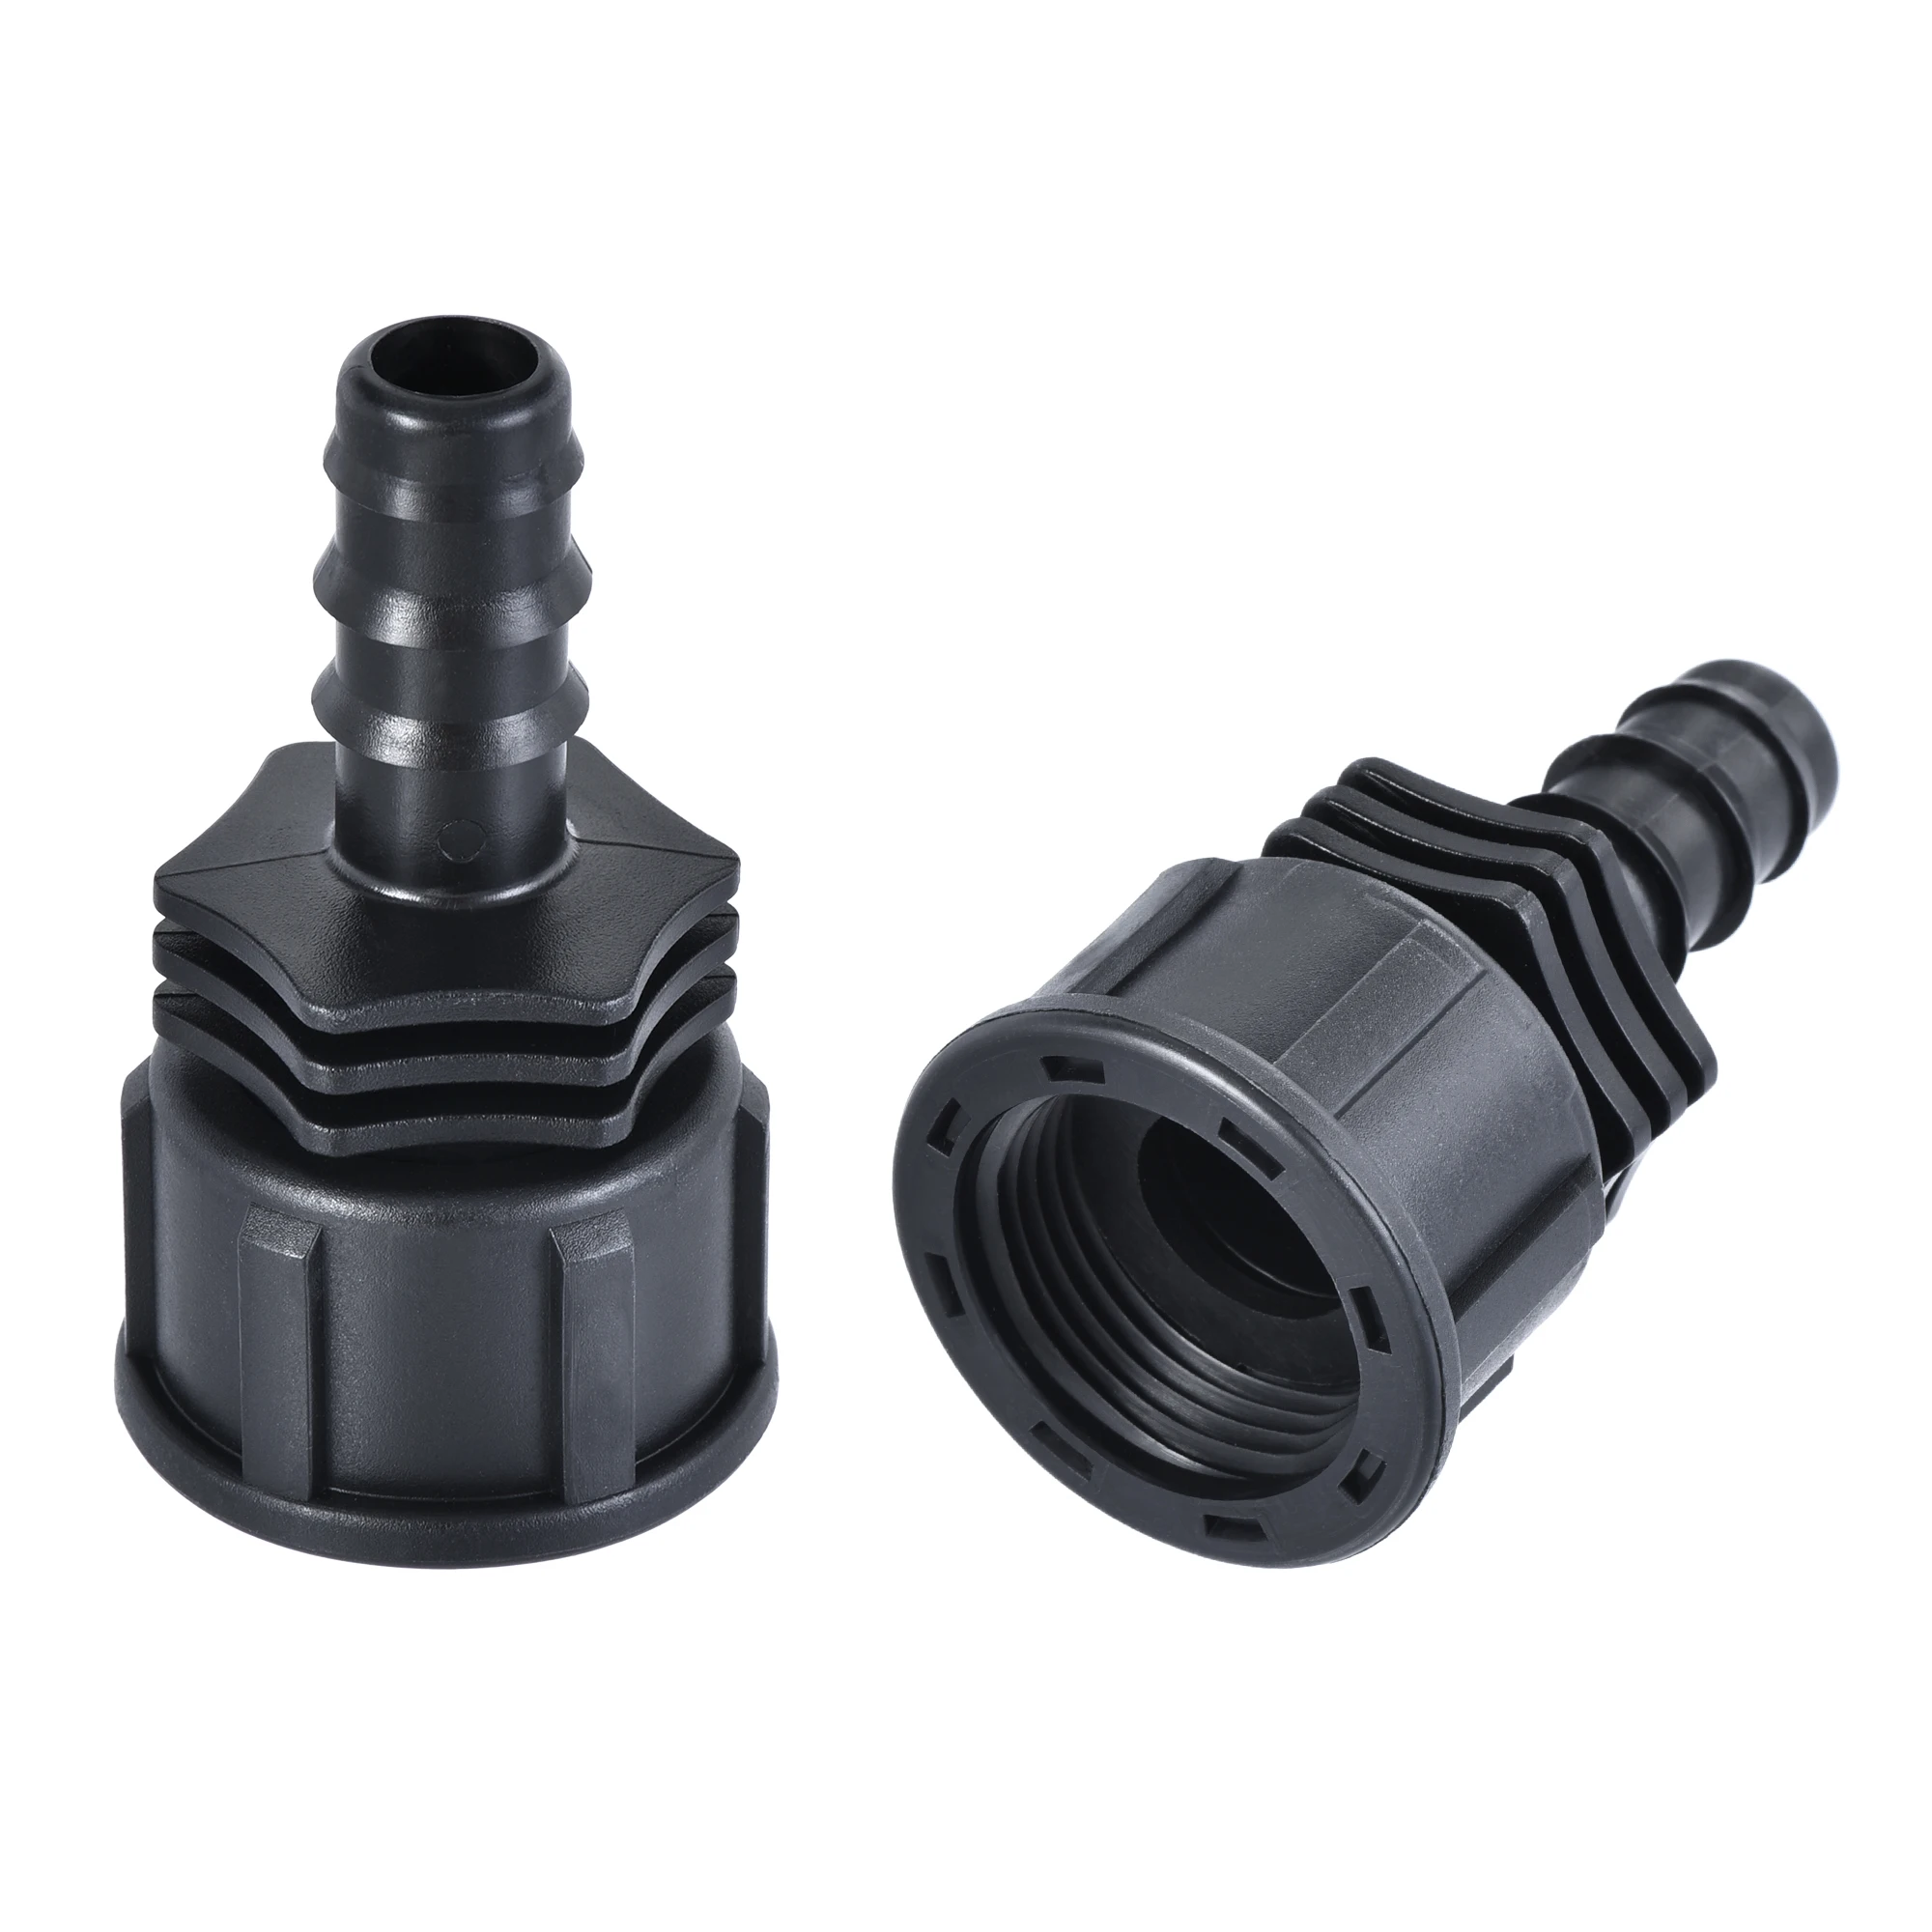 

Uxcell ABS Hose Barb Fitting Coupler 13mm Barb G3/4 Female Thread Black 2Pcs